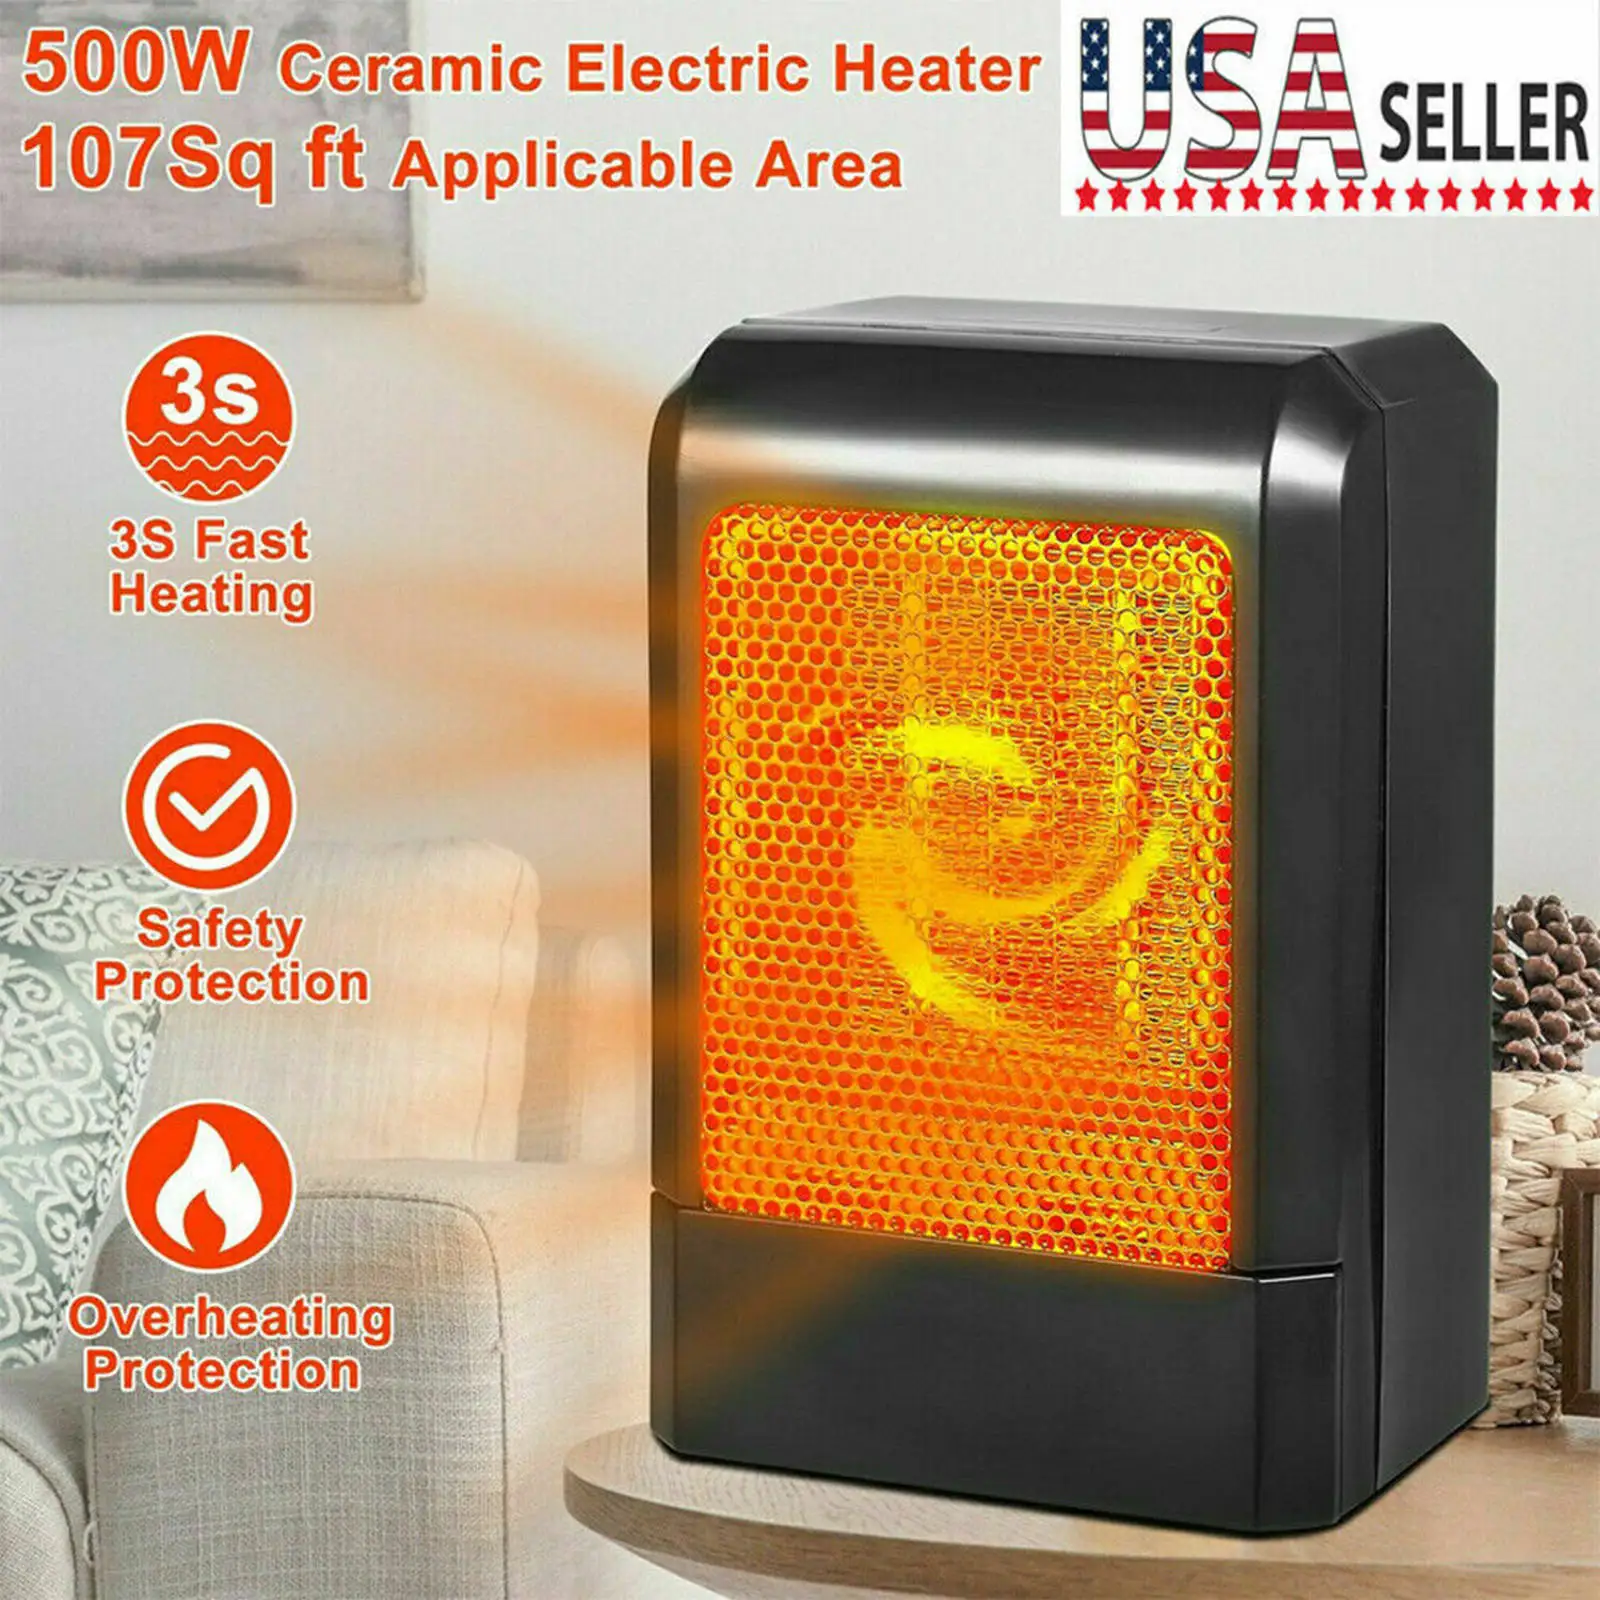 HOME OFFICE SPACE HEATING PORTABLE FAN SILENT 500W MINI CERAMIC ELECTRIC HEATER 